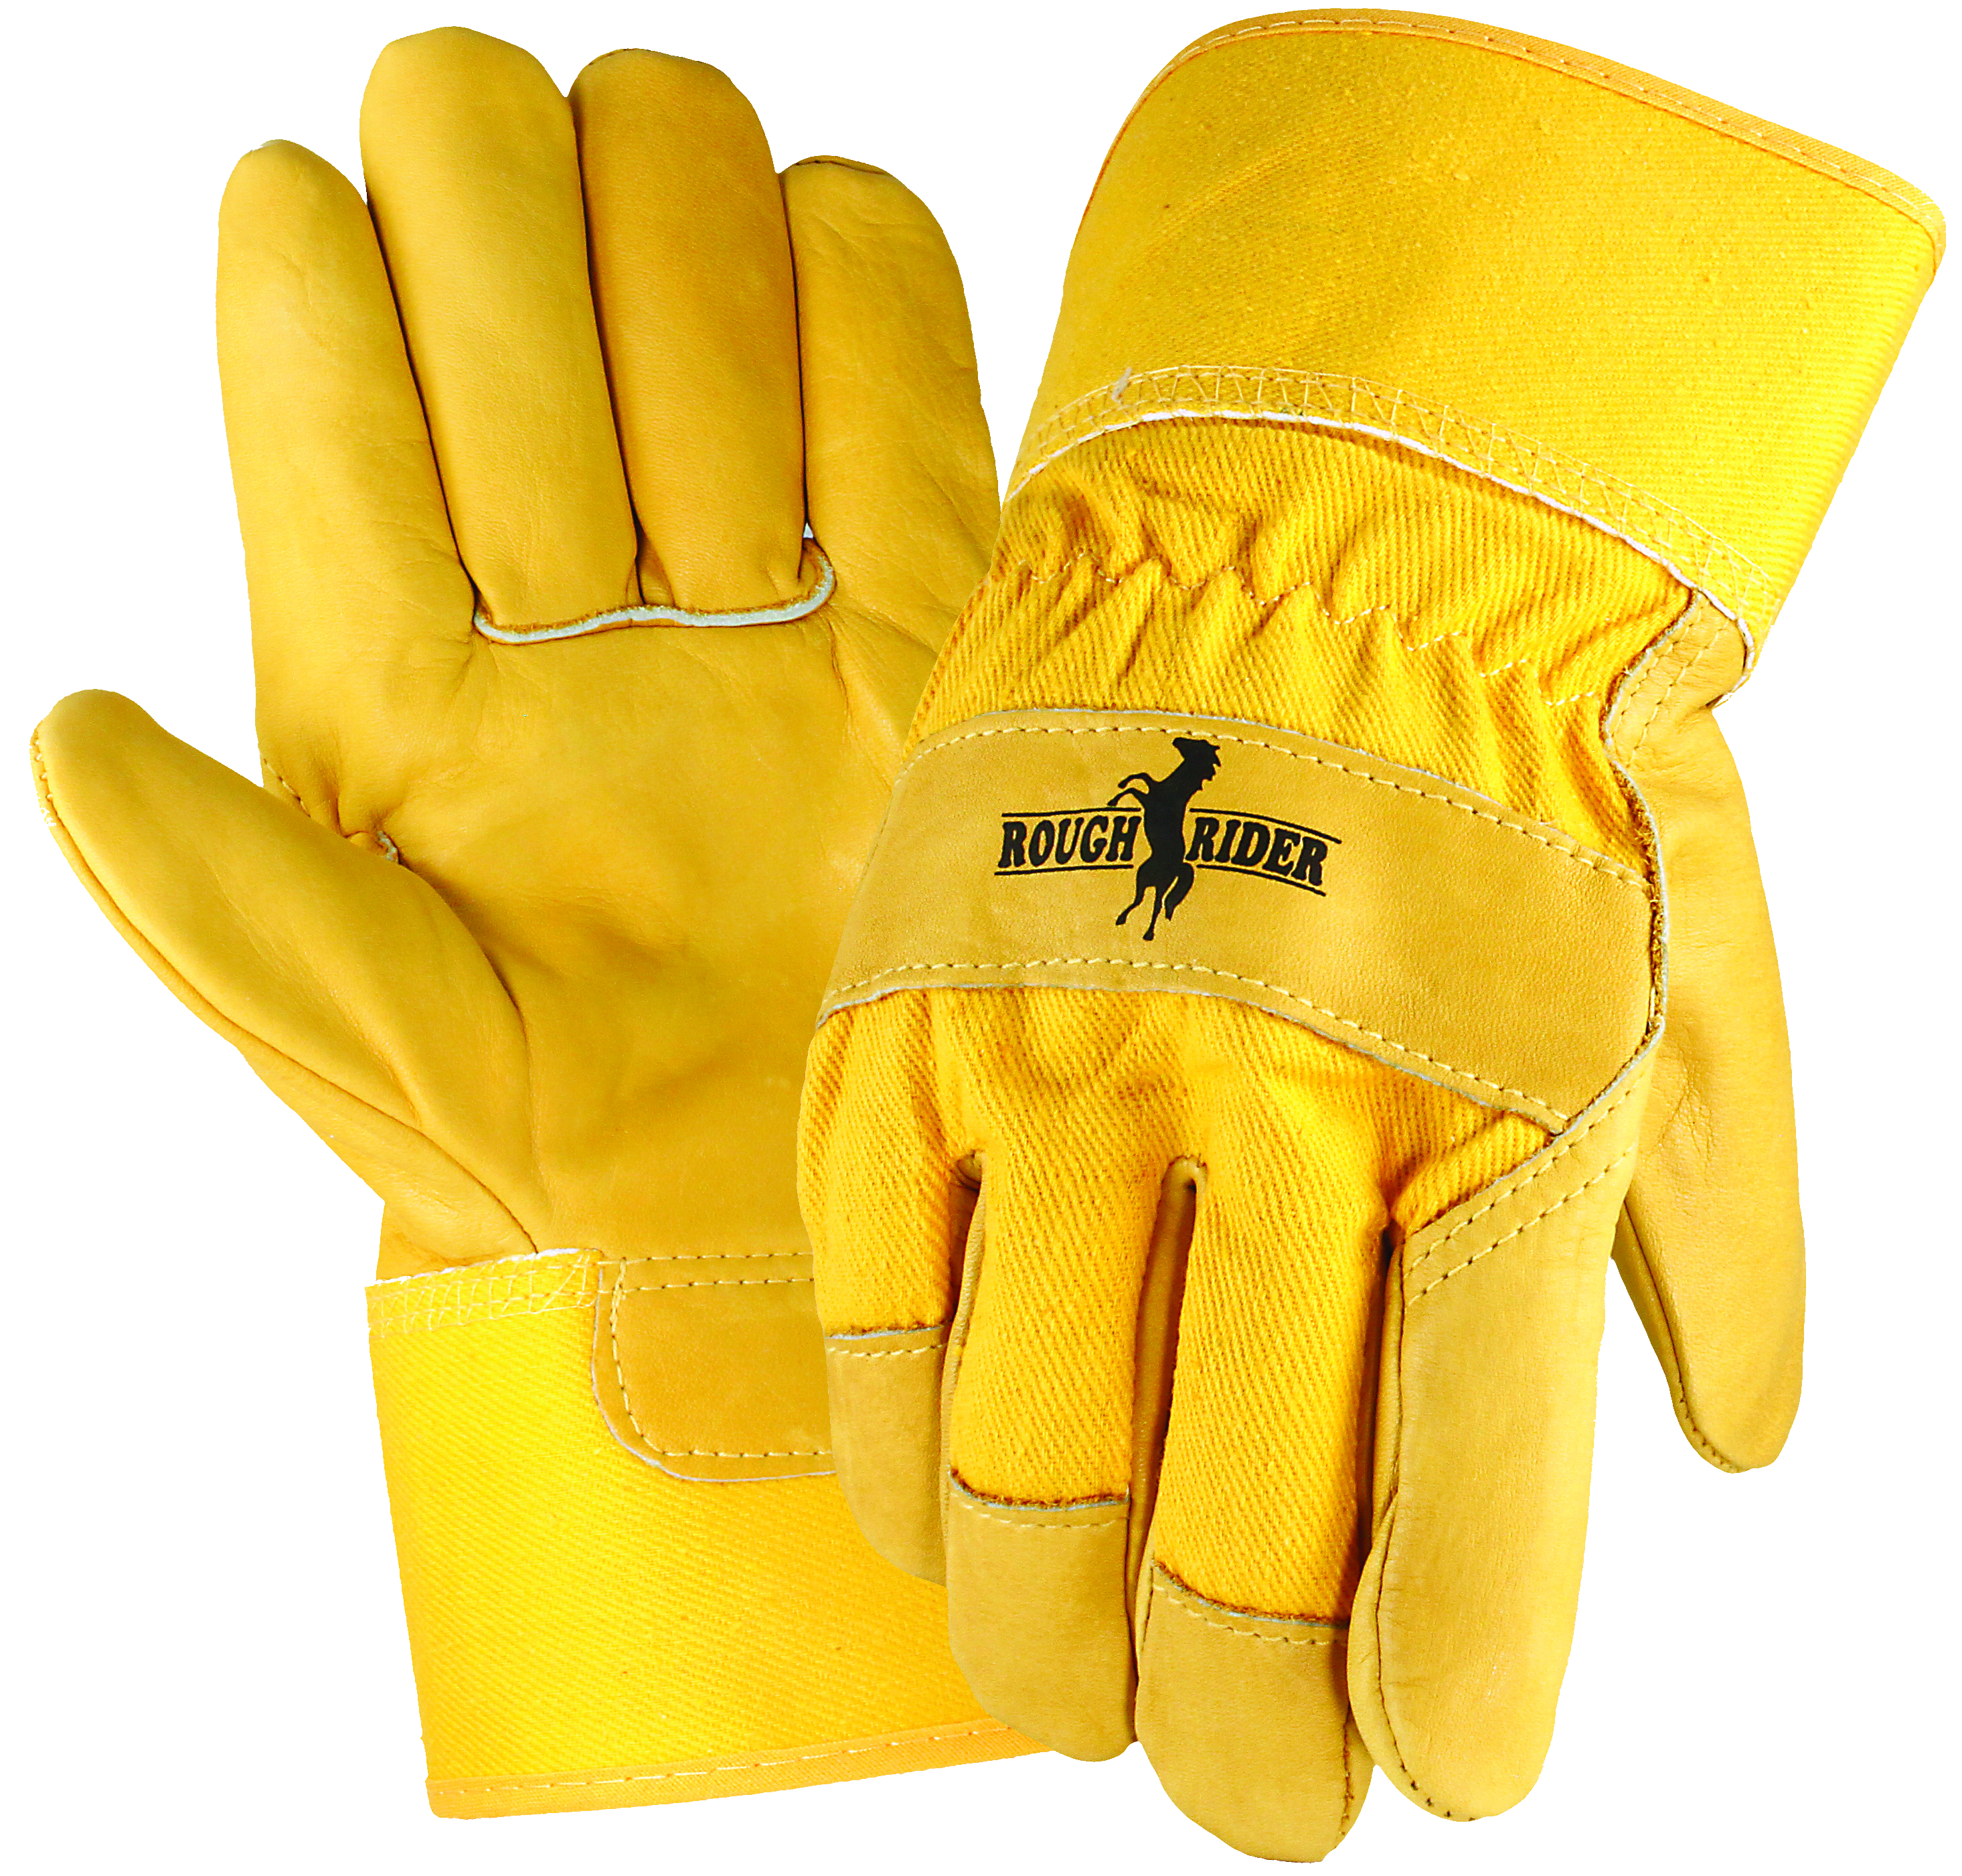 Rough Rider&trade; Grain Leather Palm Gloves, Safety Cuff